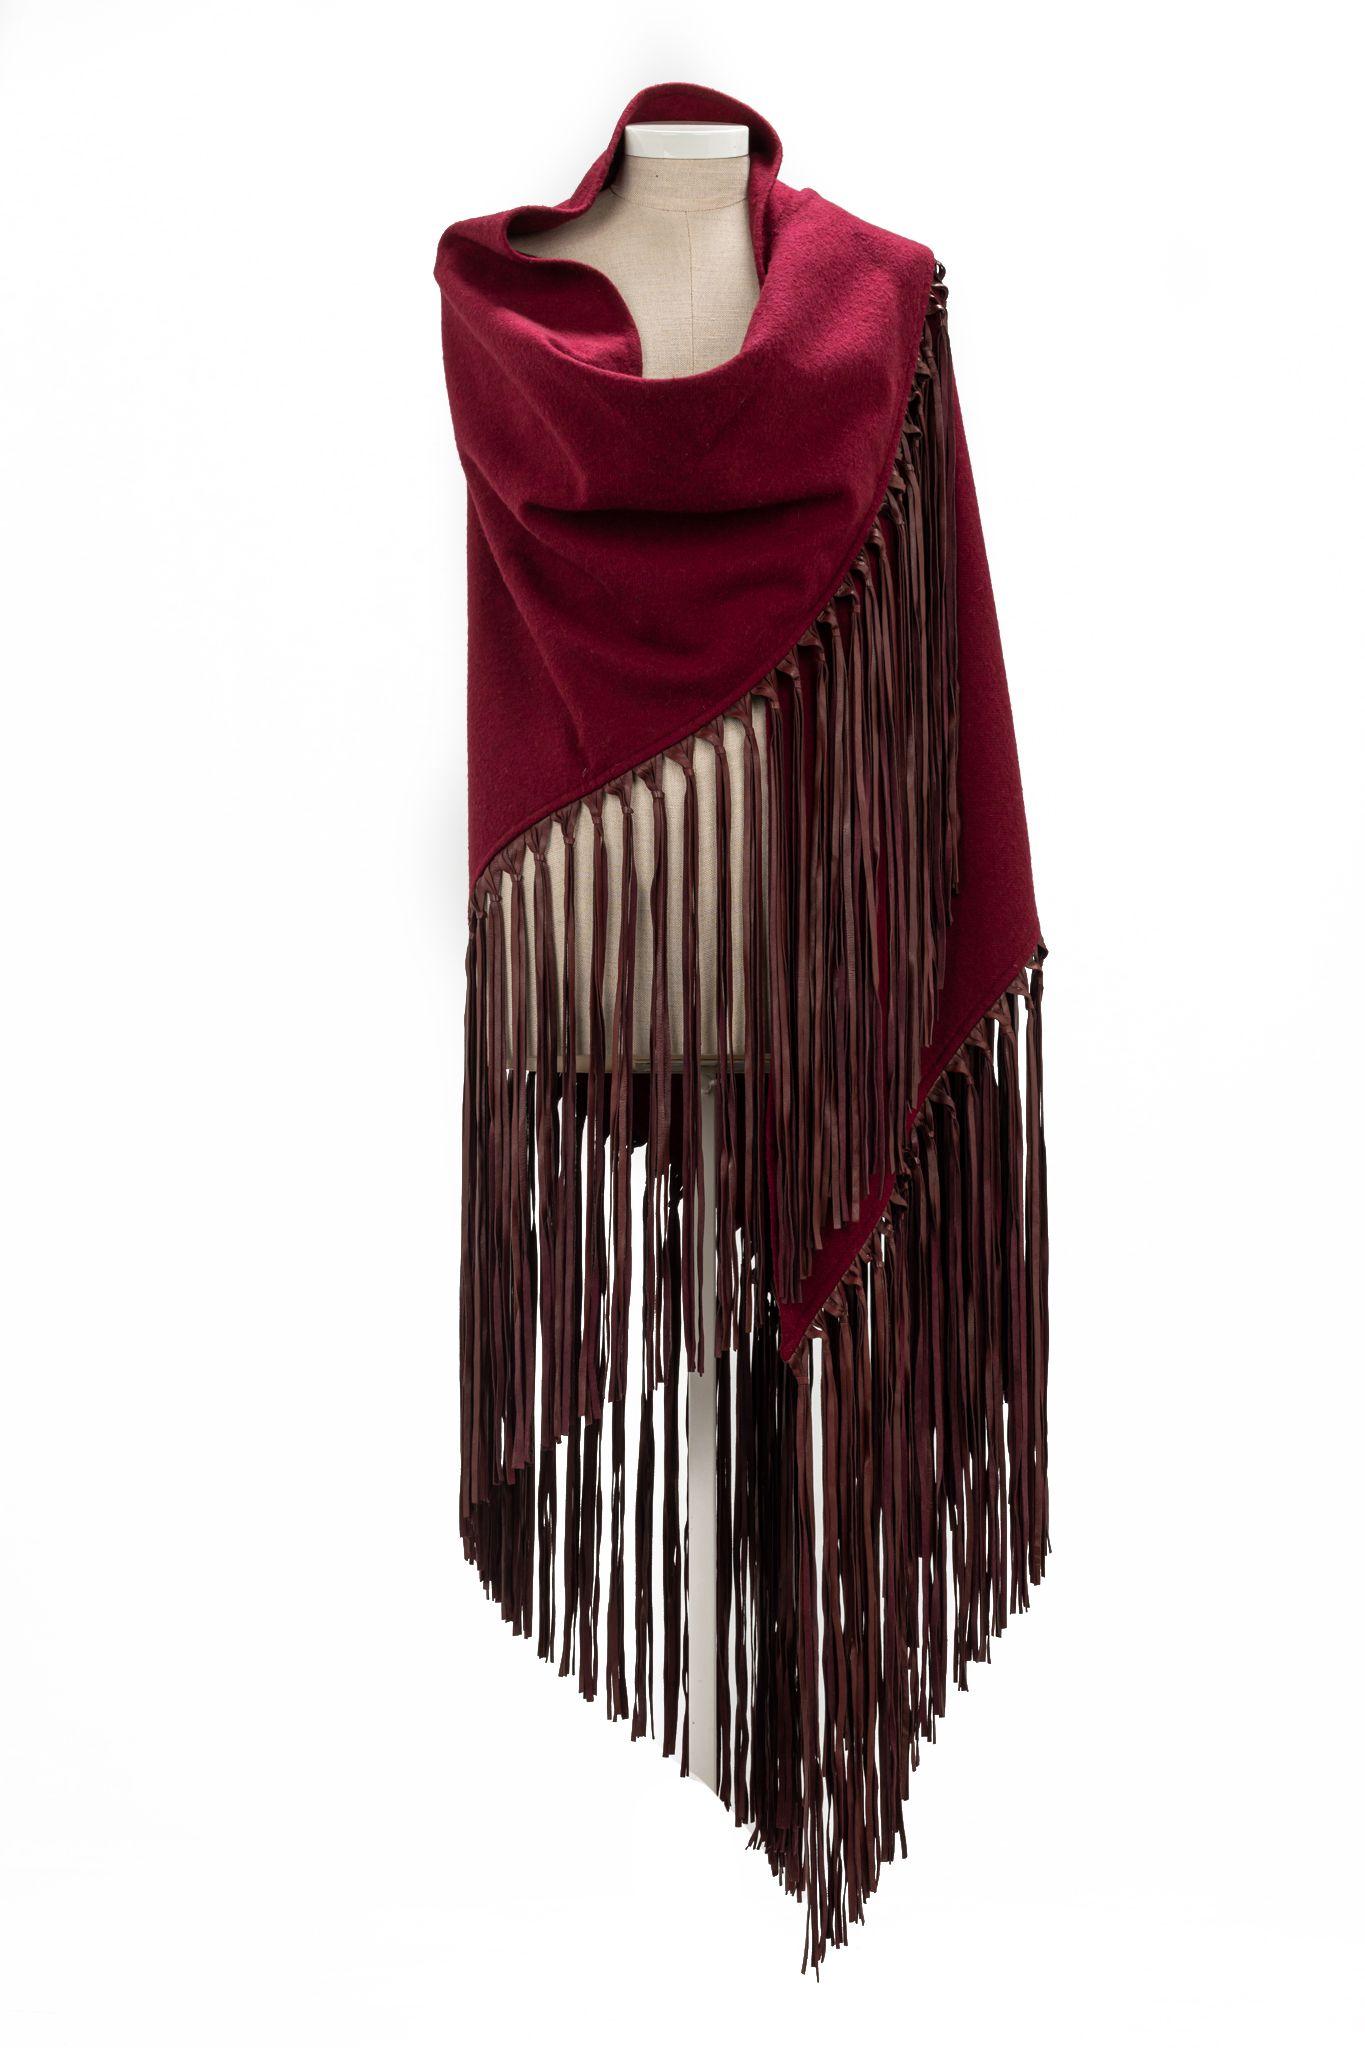 Hermès Tassle Cashmere shawl in burgundy red. The shawl has leather fringes. Piece is in excellent condition.